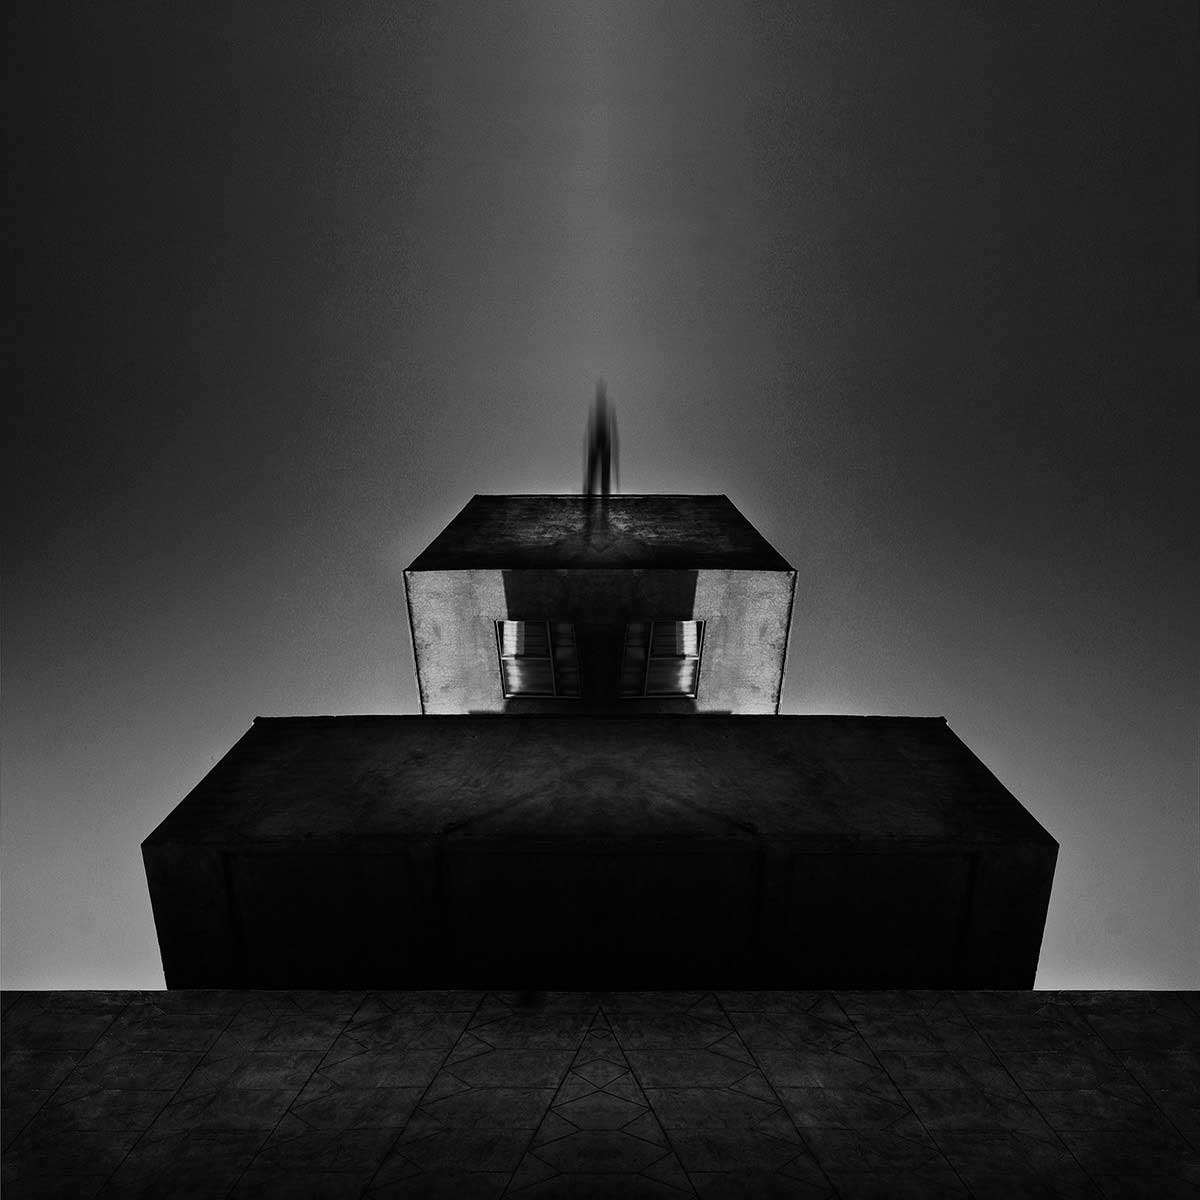 The Space in between | Milad Safabakhsh